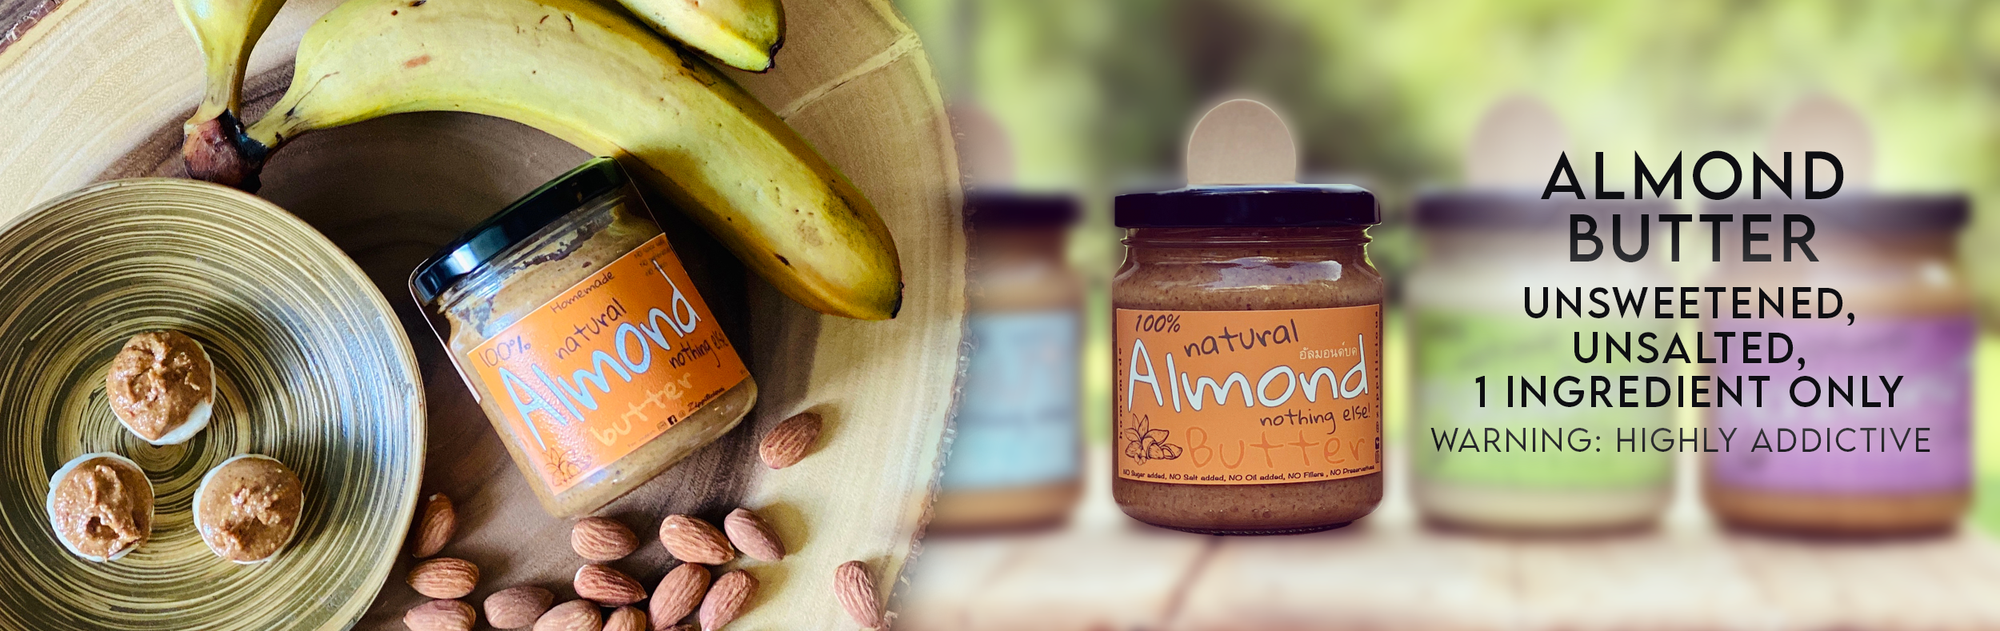 Almond Butter - Unsweetened, Unsalted, 1 Ingredient Only. Warning: Highly Addictive